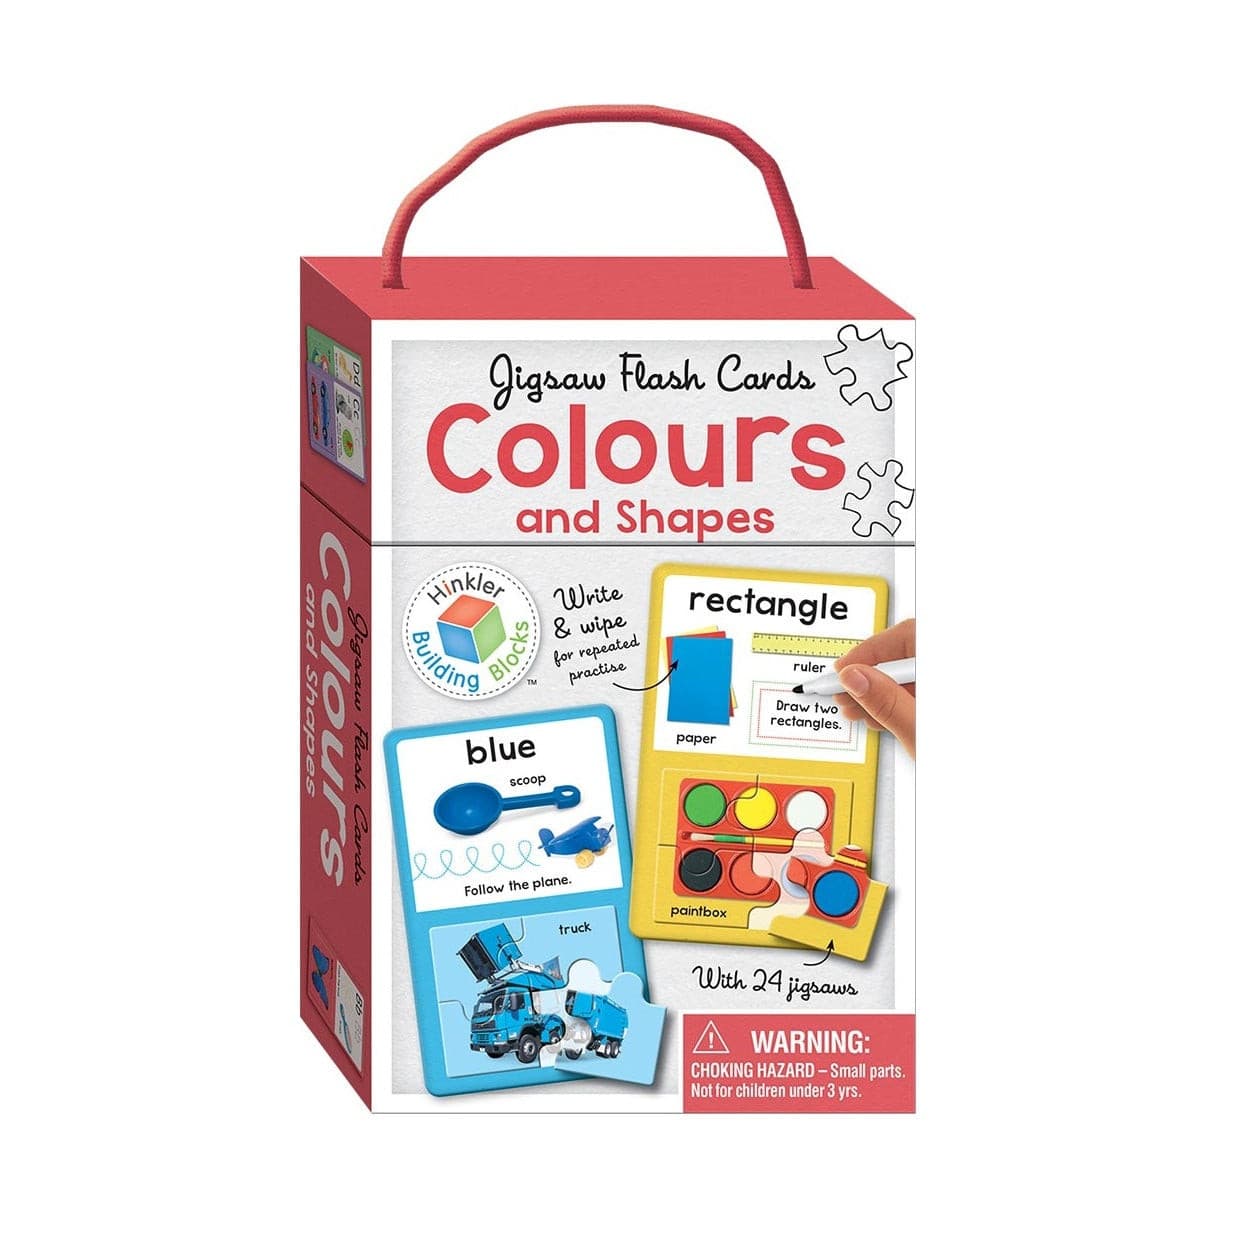 Jigsaw Flash Cards: Colours and Shapes.